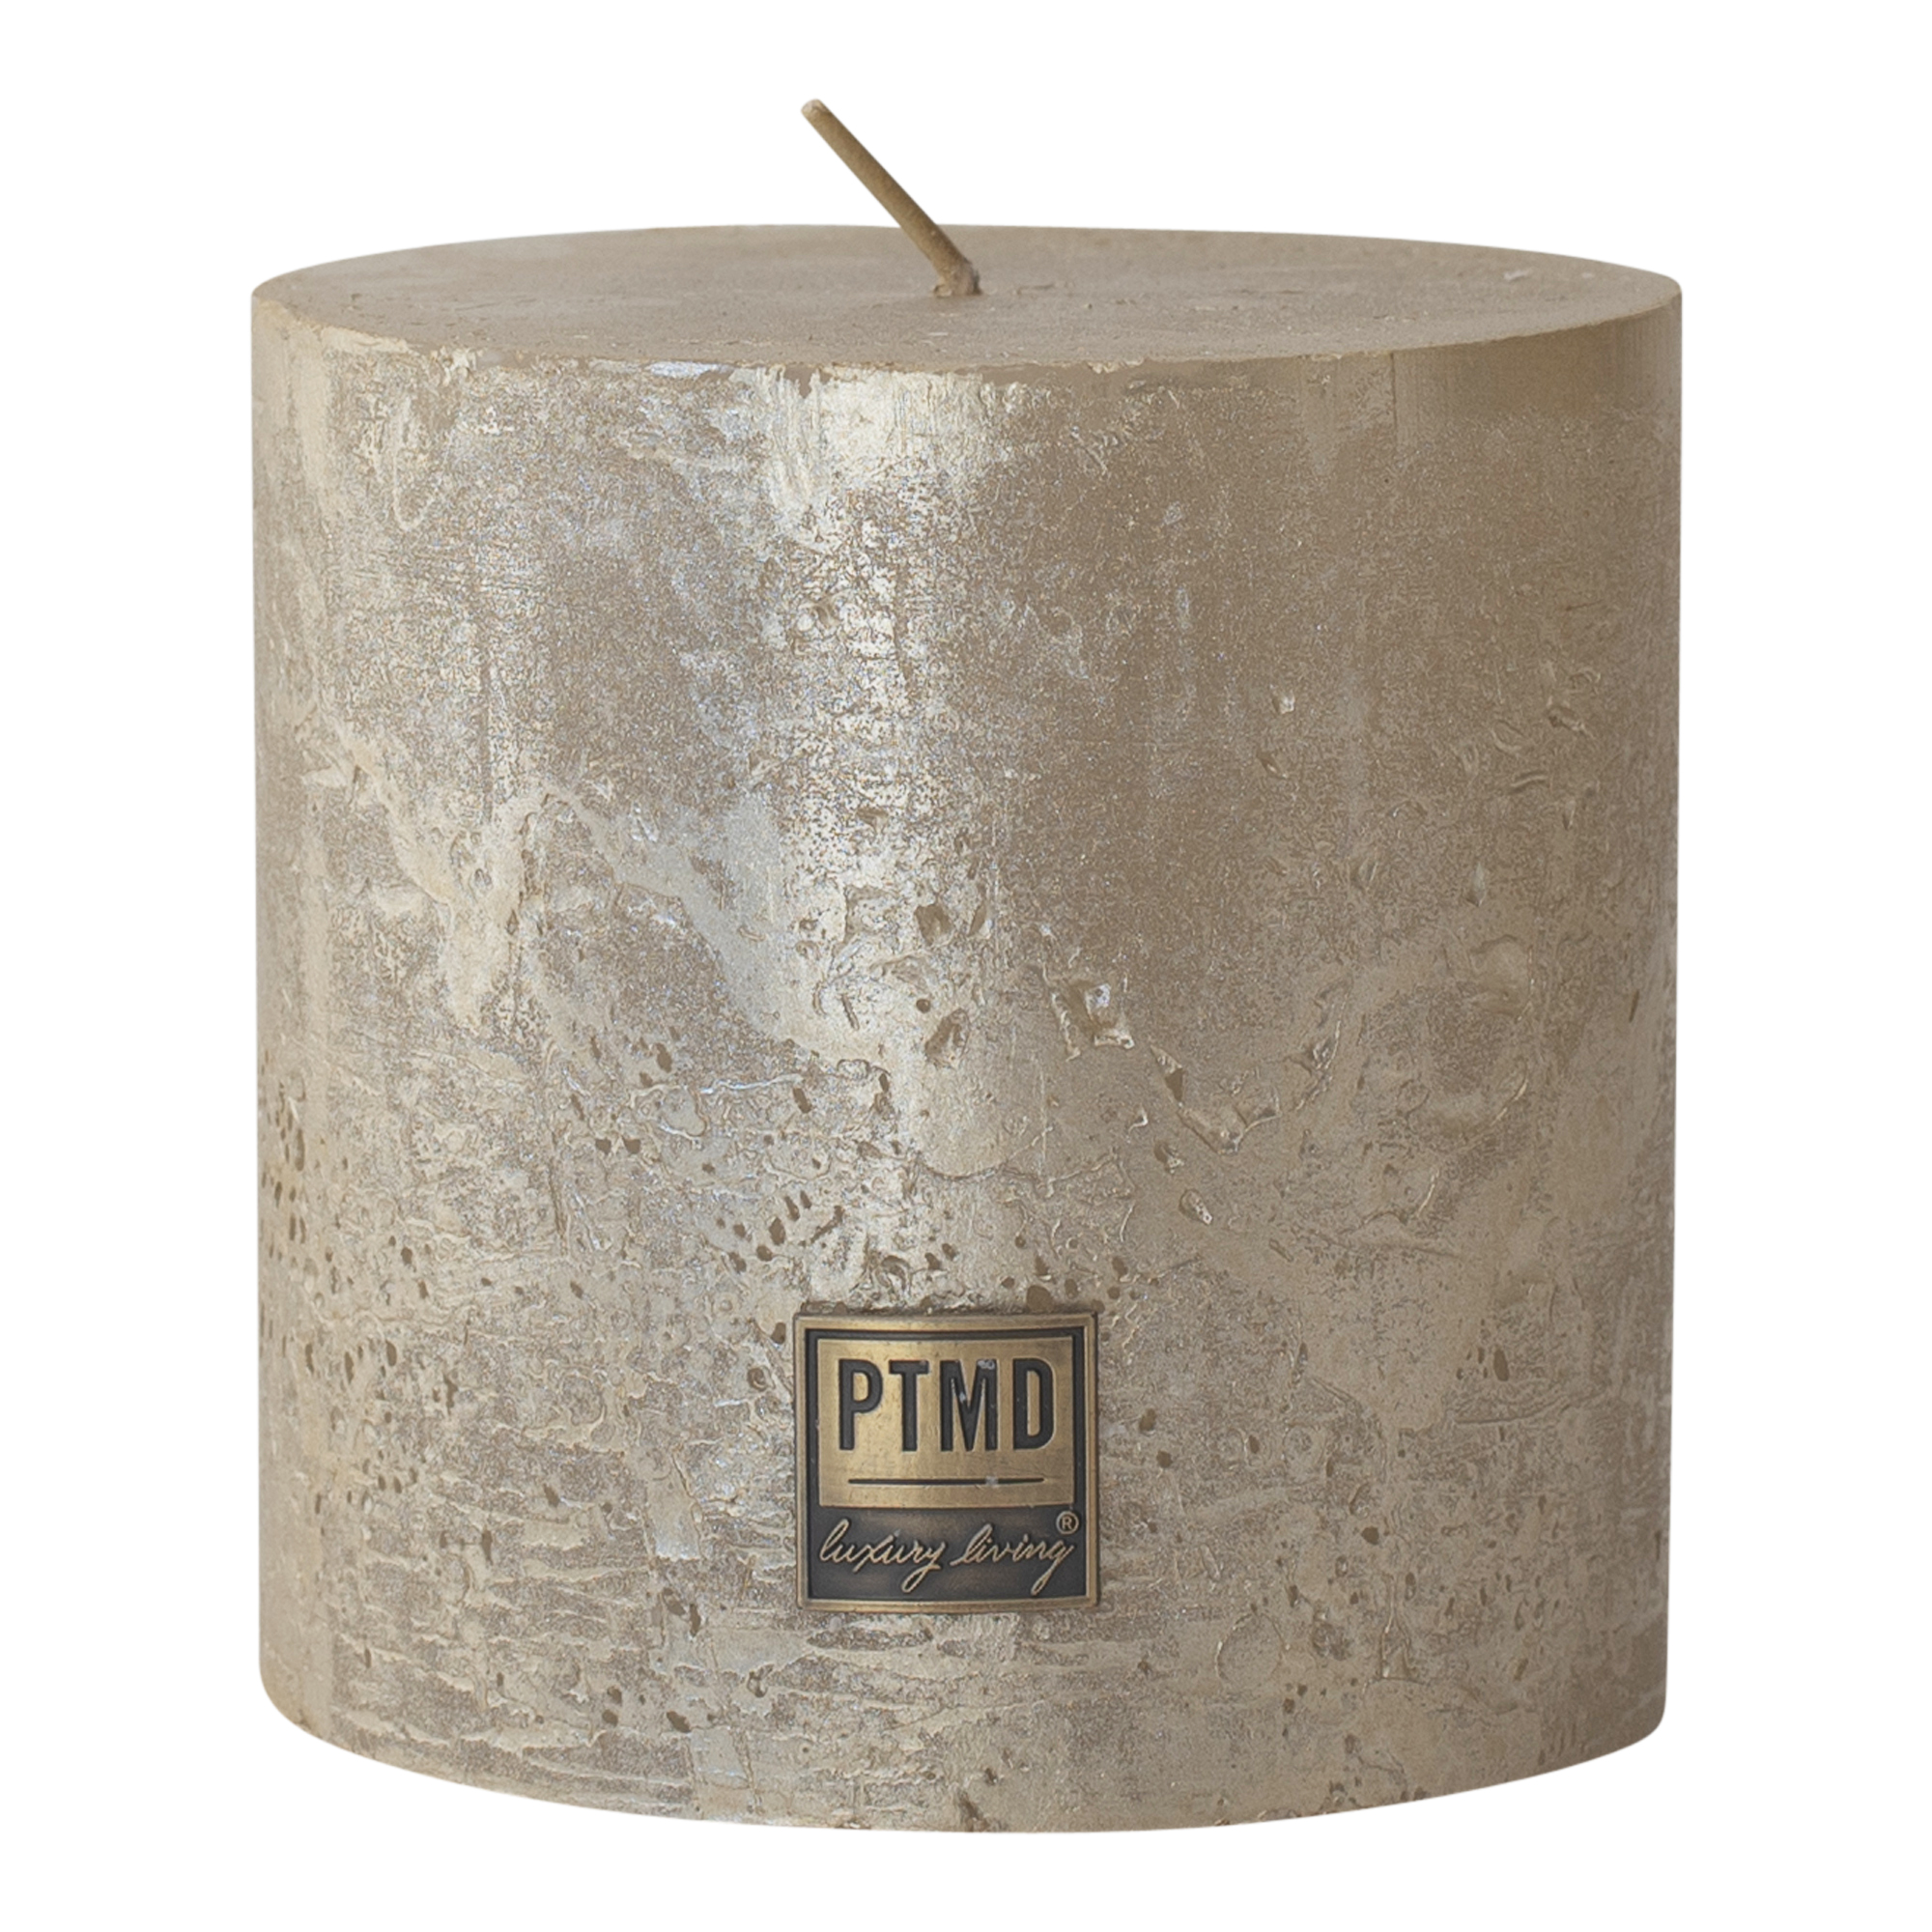 PTMD 10 x 10cm Metallic Gold Block Candle